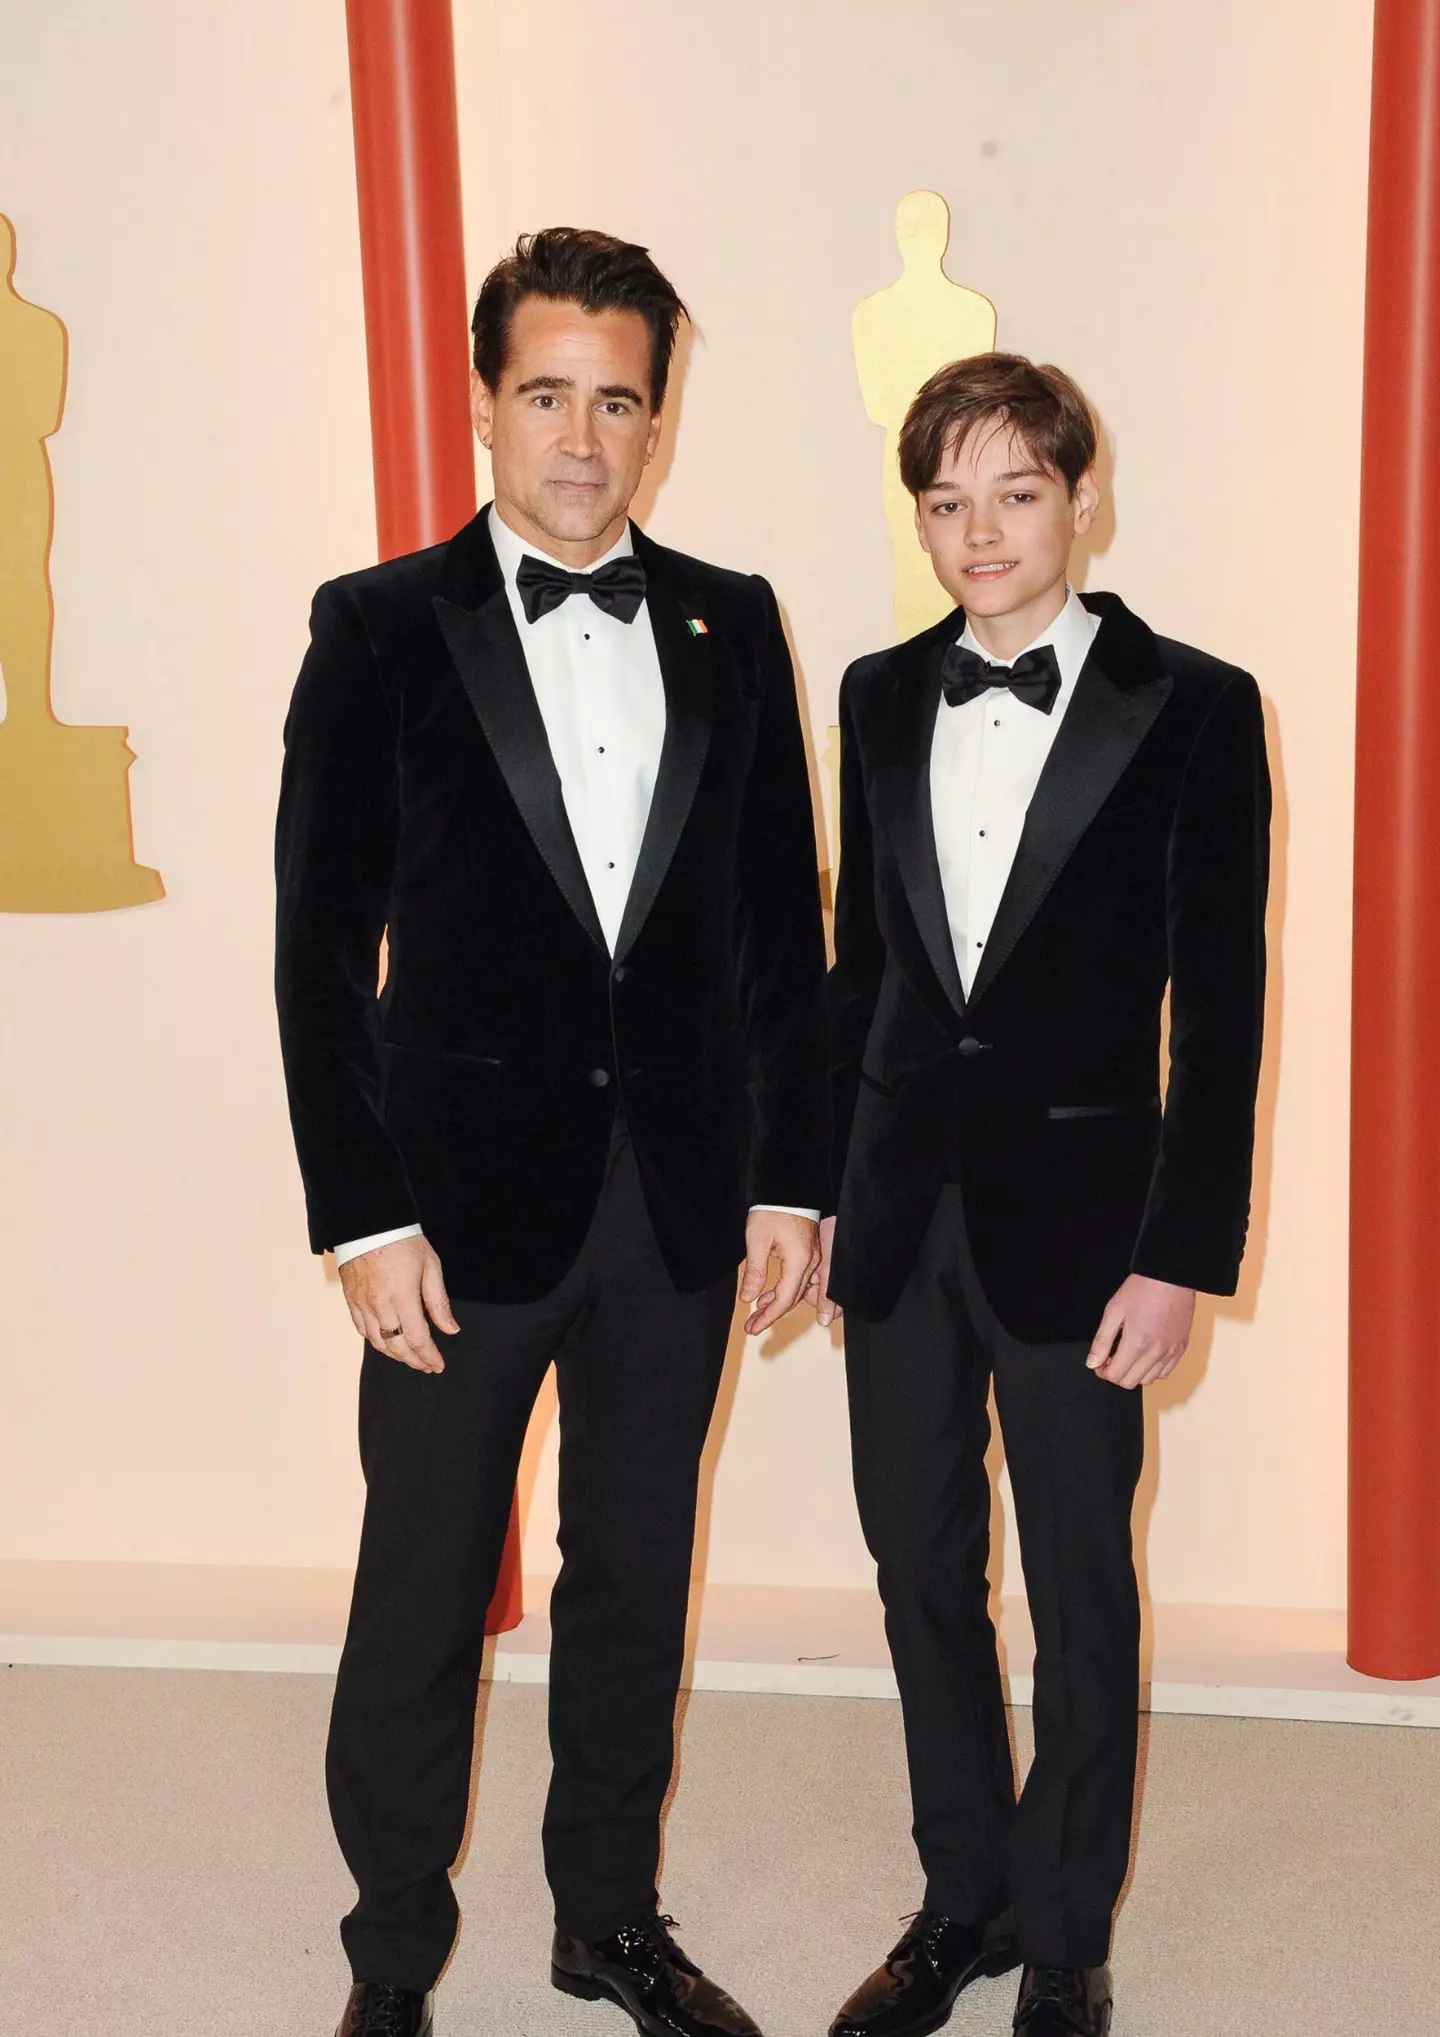 Colin brought his son along to the Oscars.